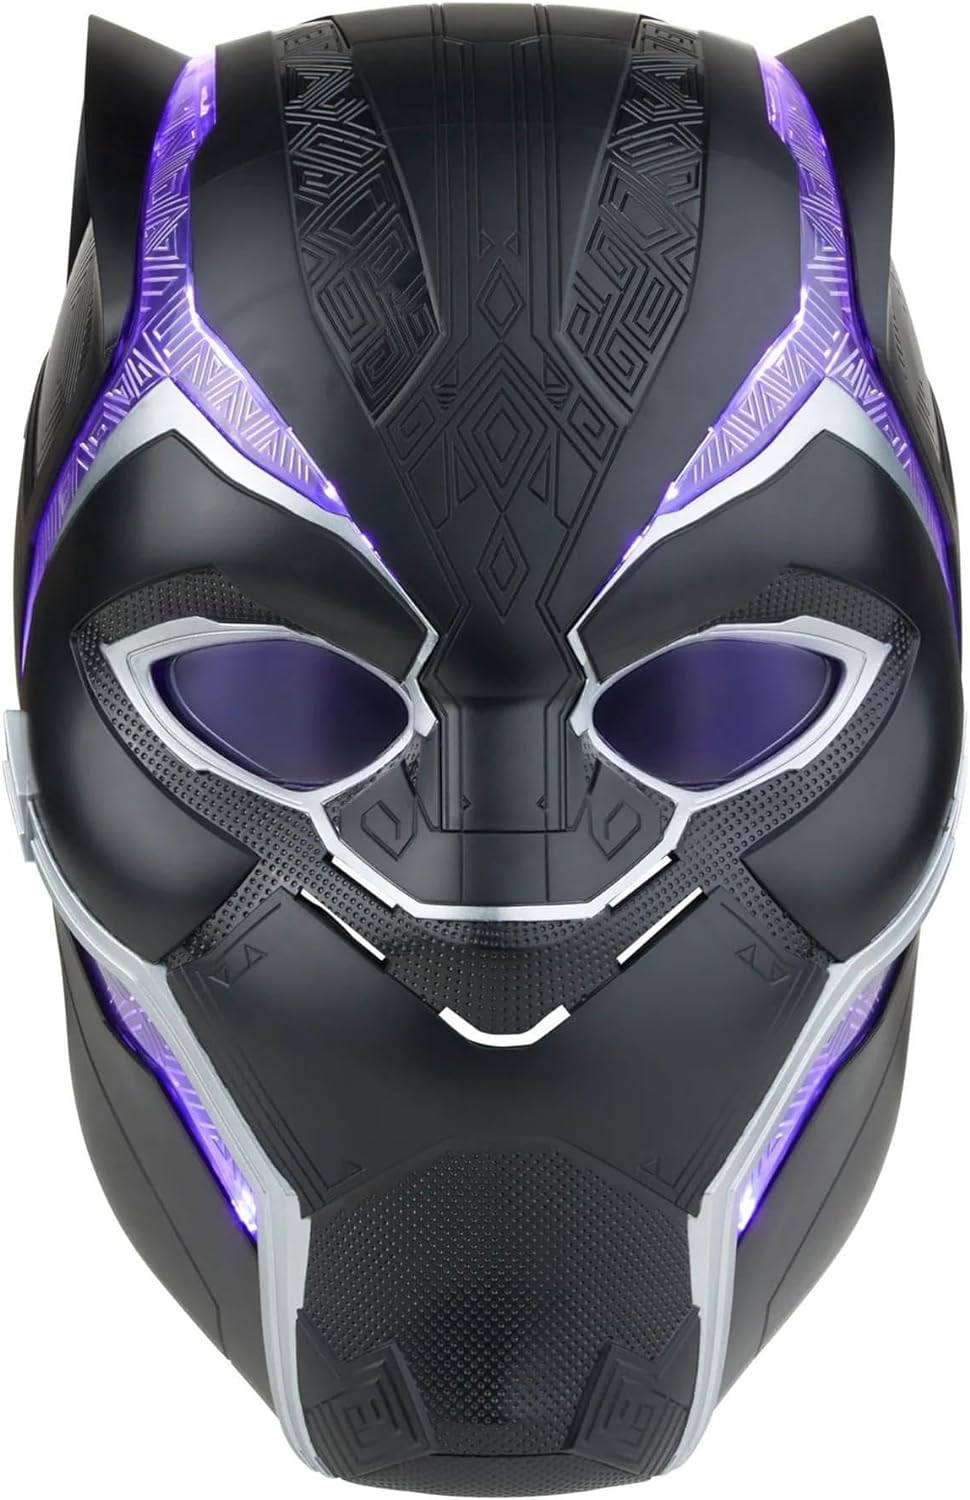 Marvel Legends Black Panther Premium Electronic Role Play Helmet $48 & More + Free Shipping